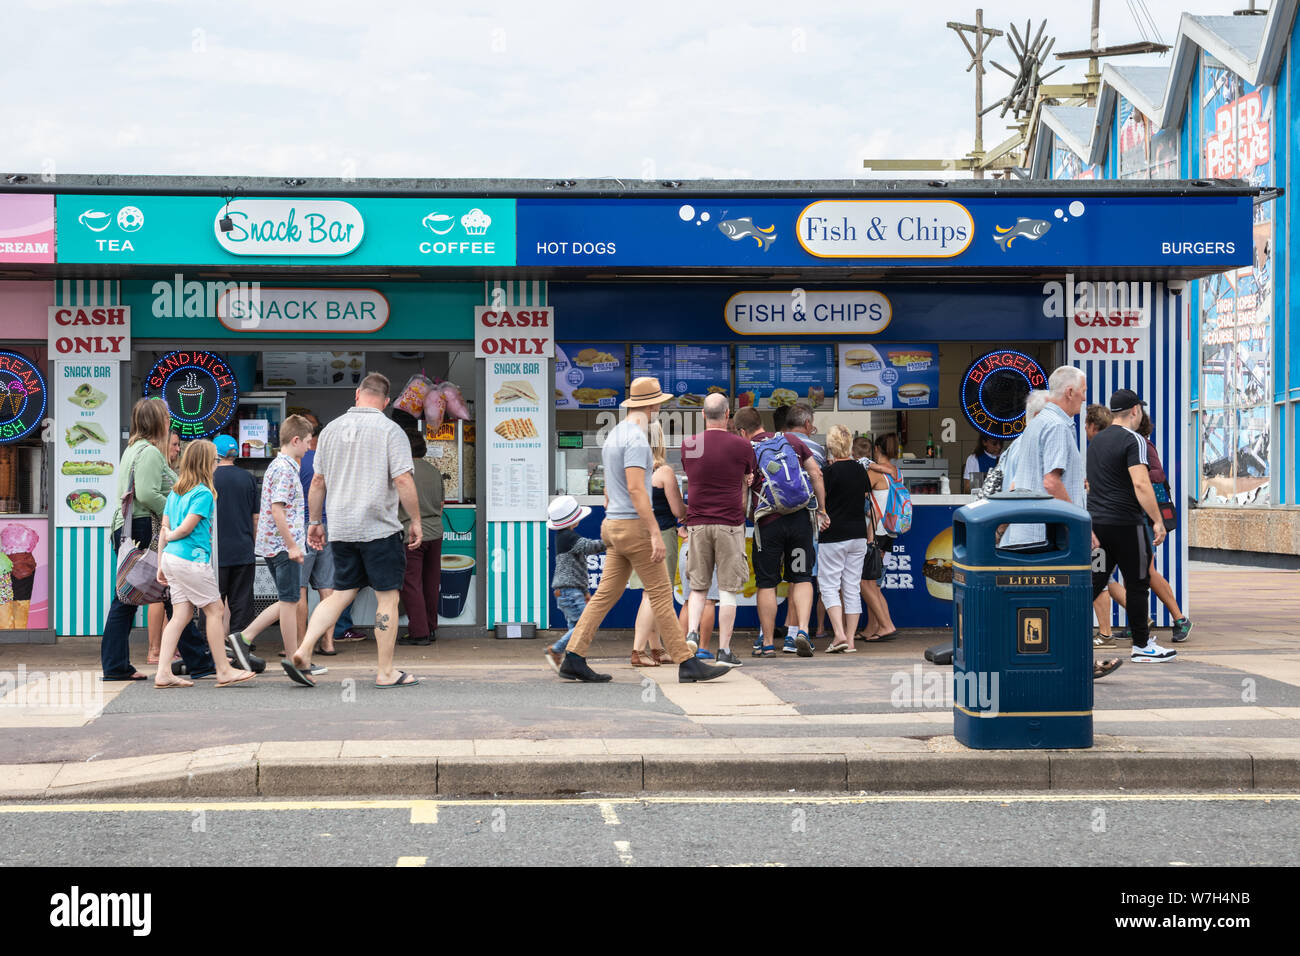 People queue for food at a seaside kiosk or fish and chips stall Stock Photo